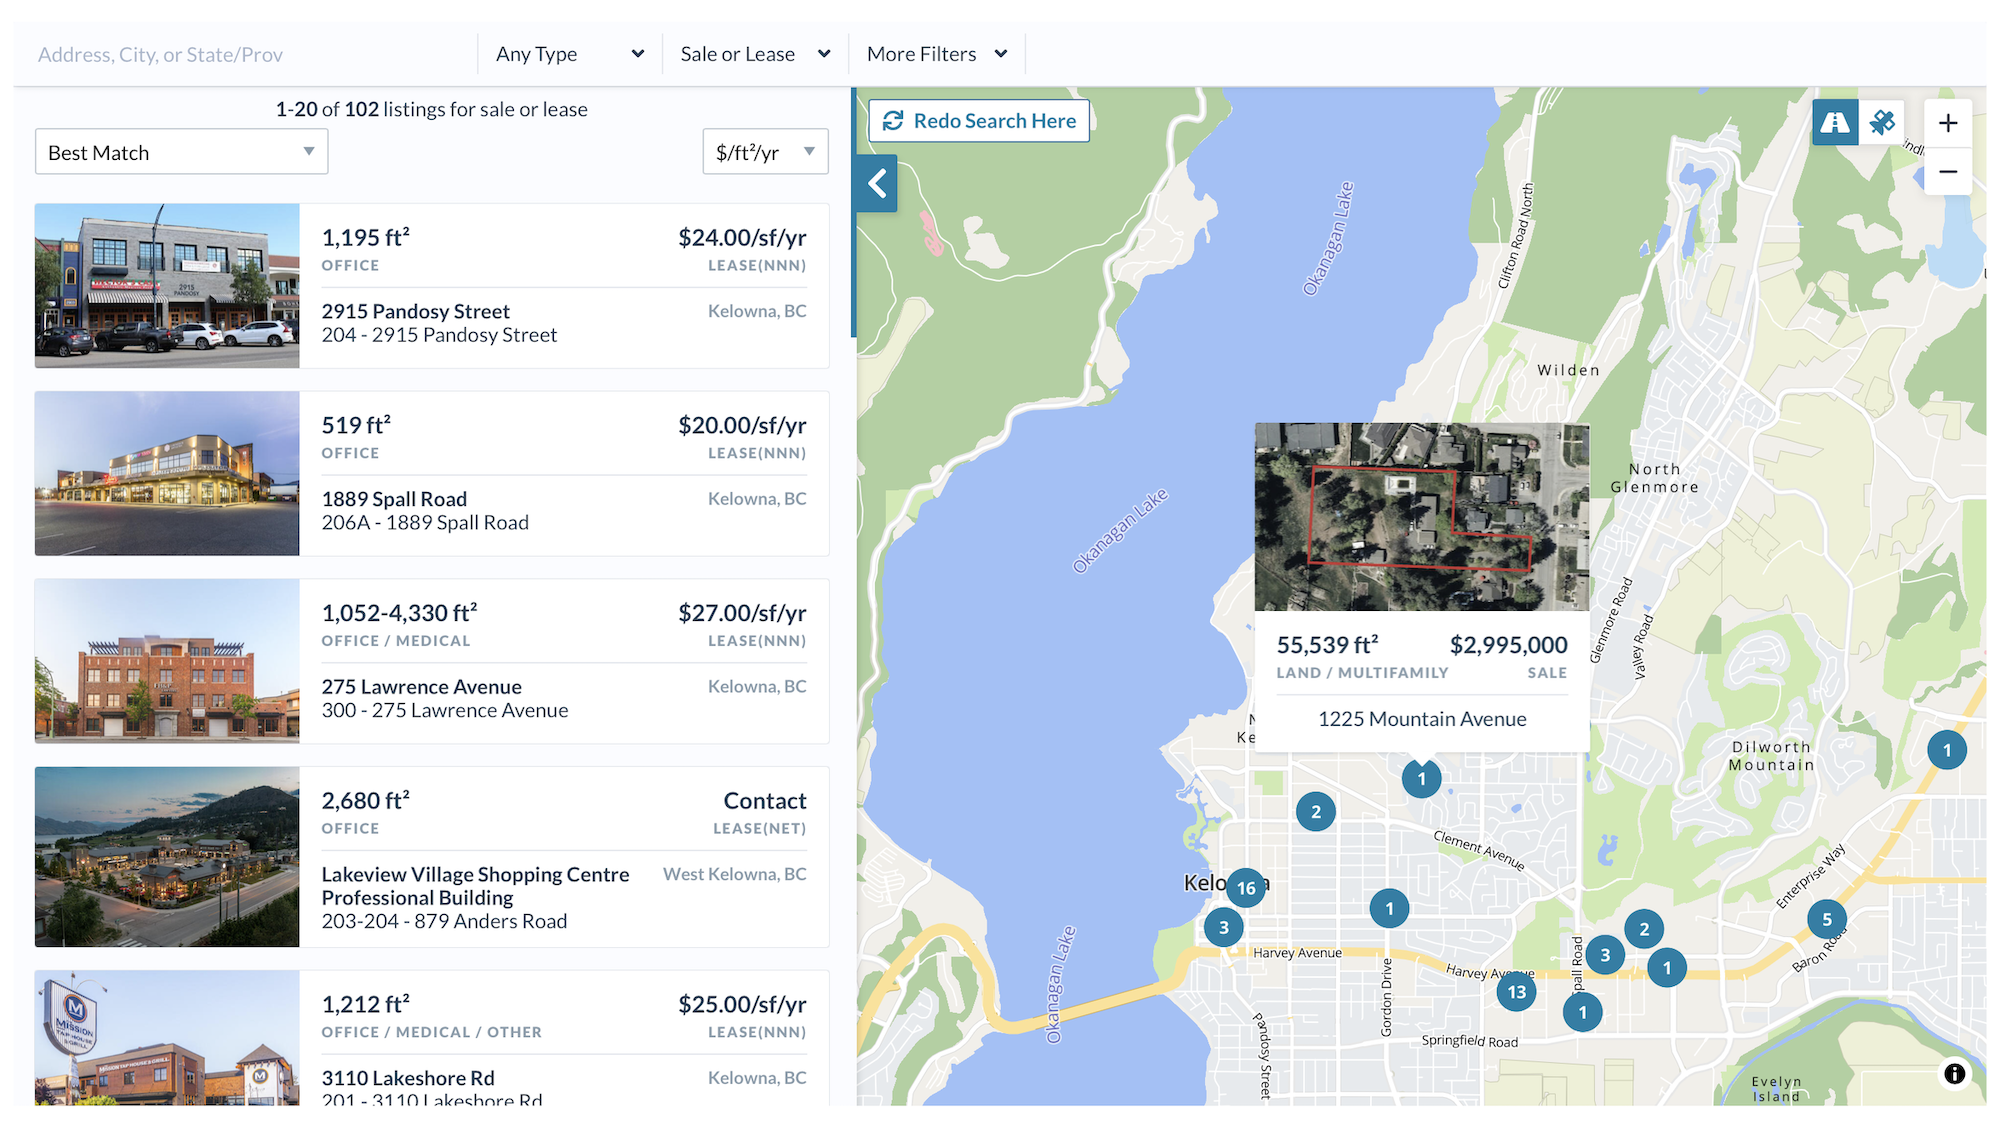 Custom integration of MLS listings of commercial properties and land for sale or lease into CityViz economic development data portal